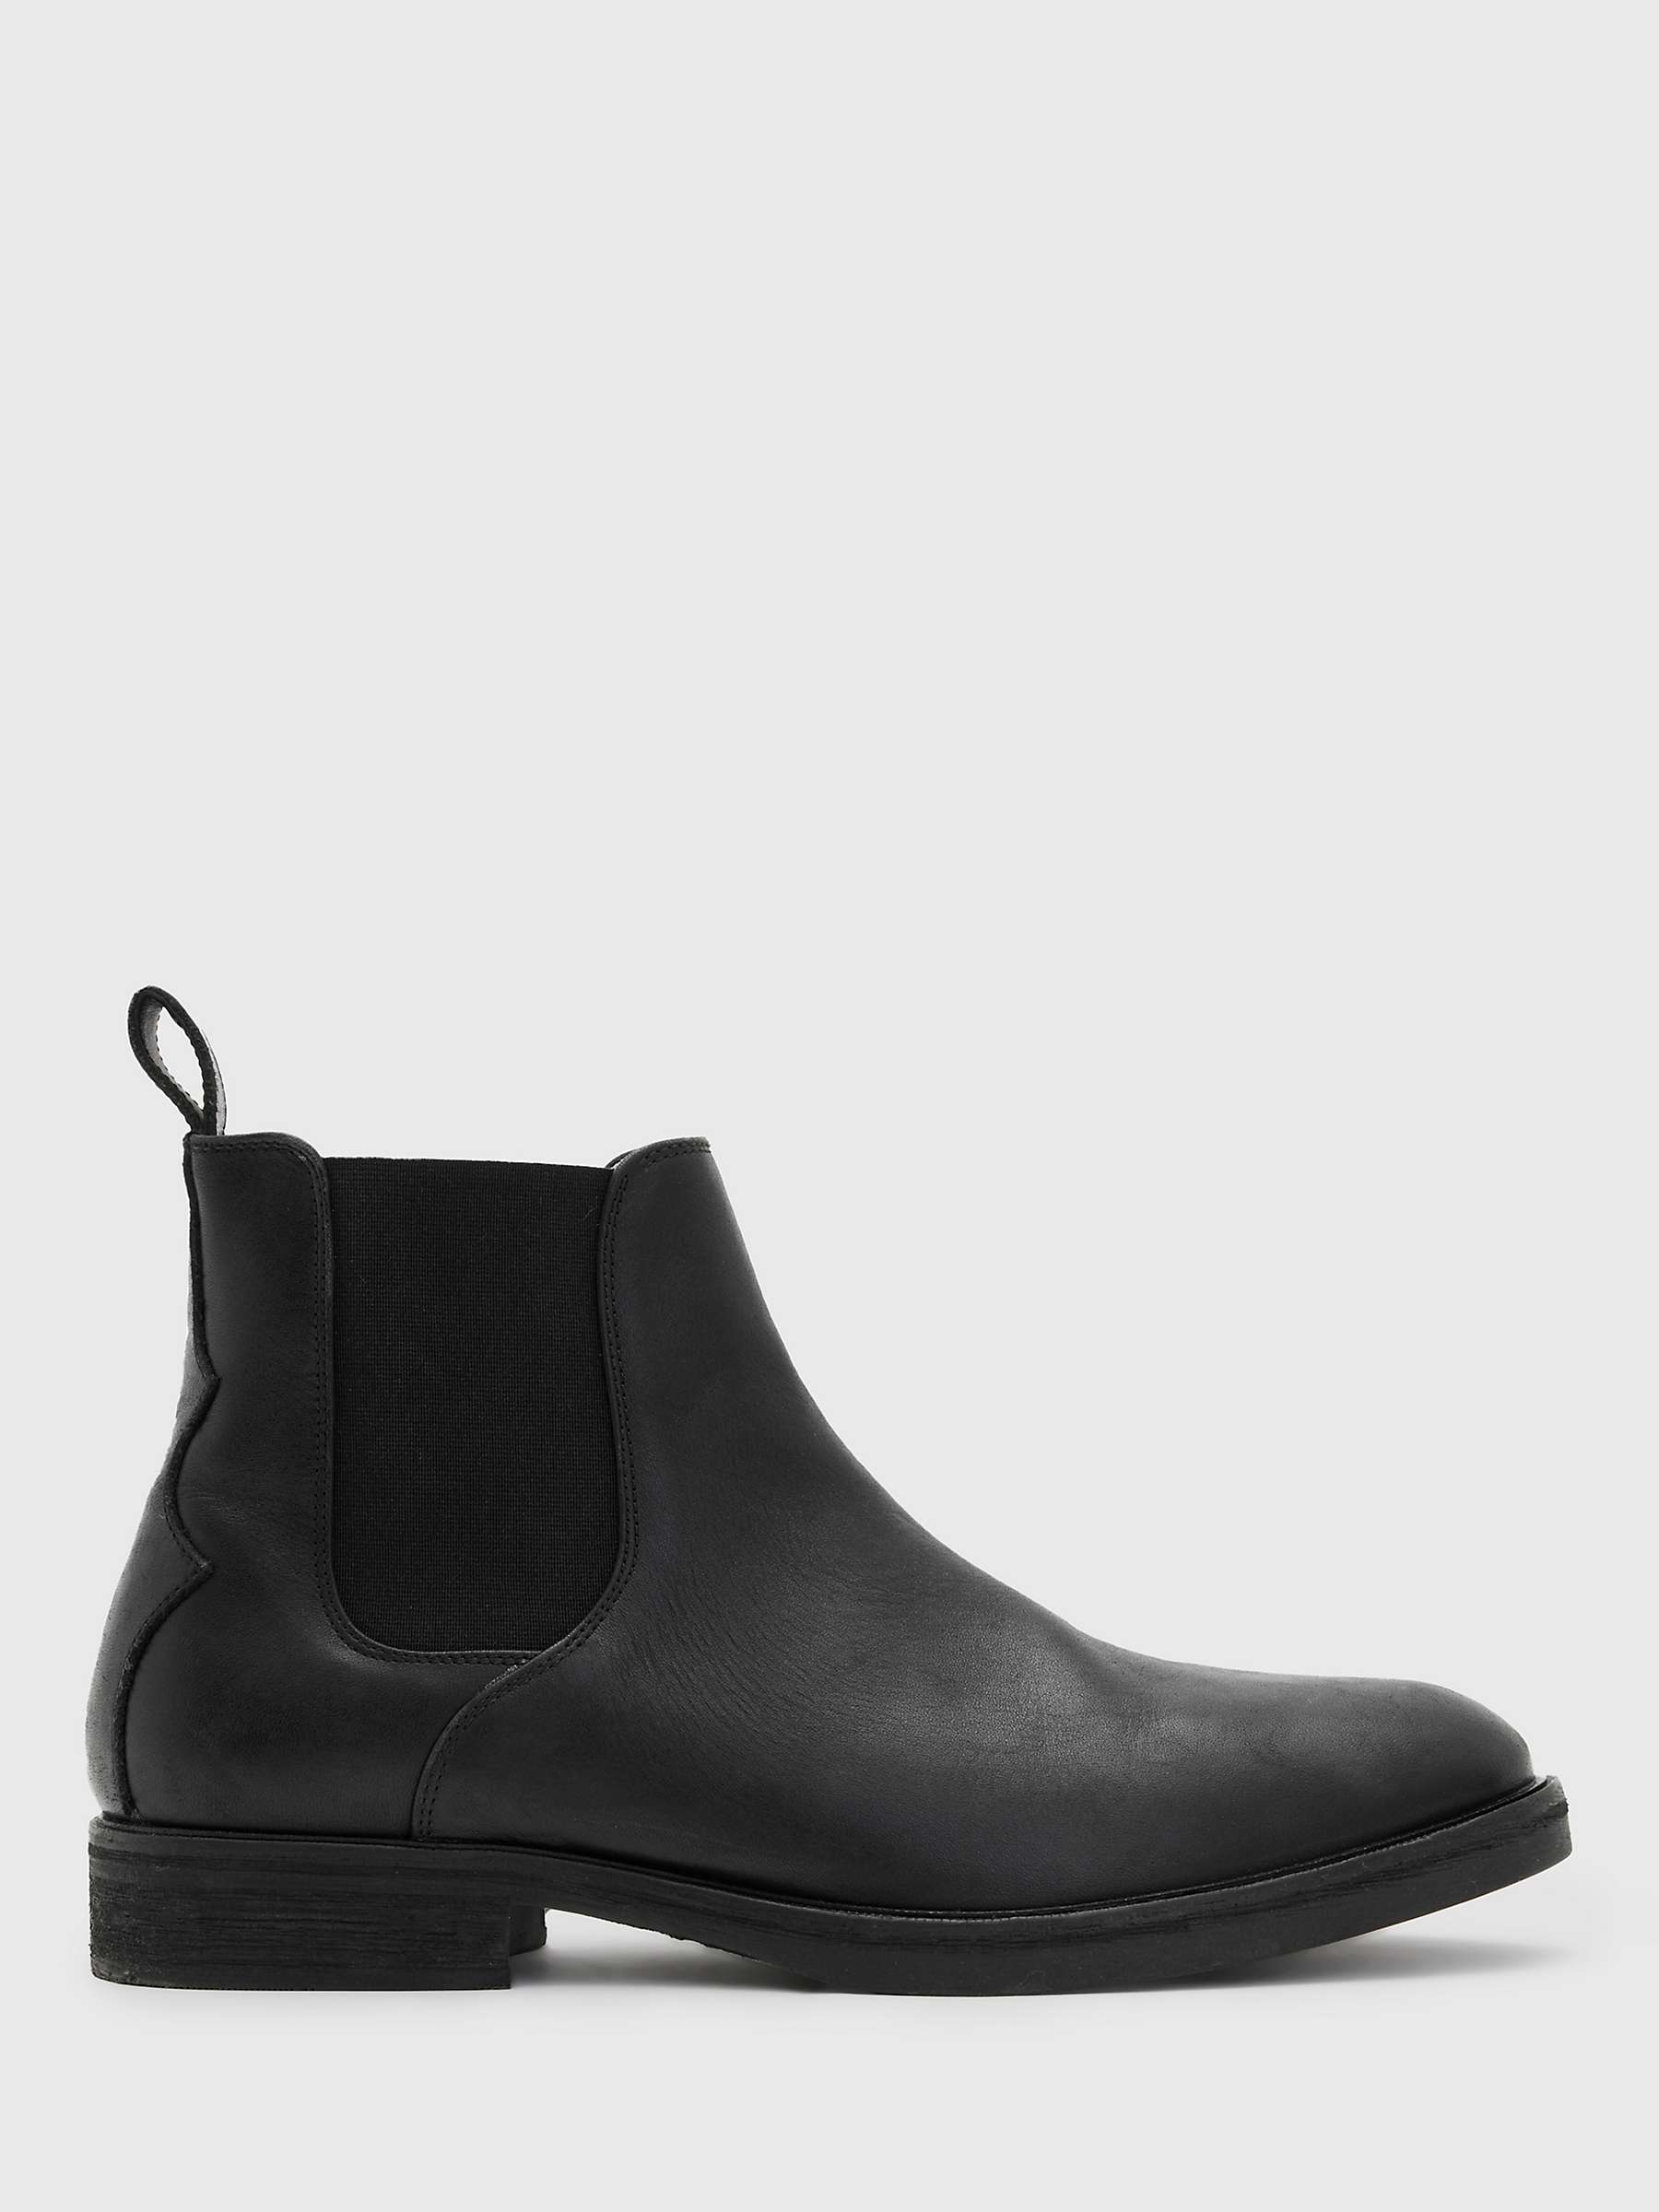 Buy AllSaints Creed Leather Chelsea Boots, Black Online at johnlewis.com